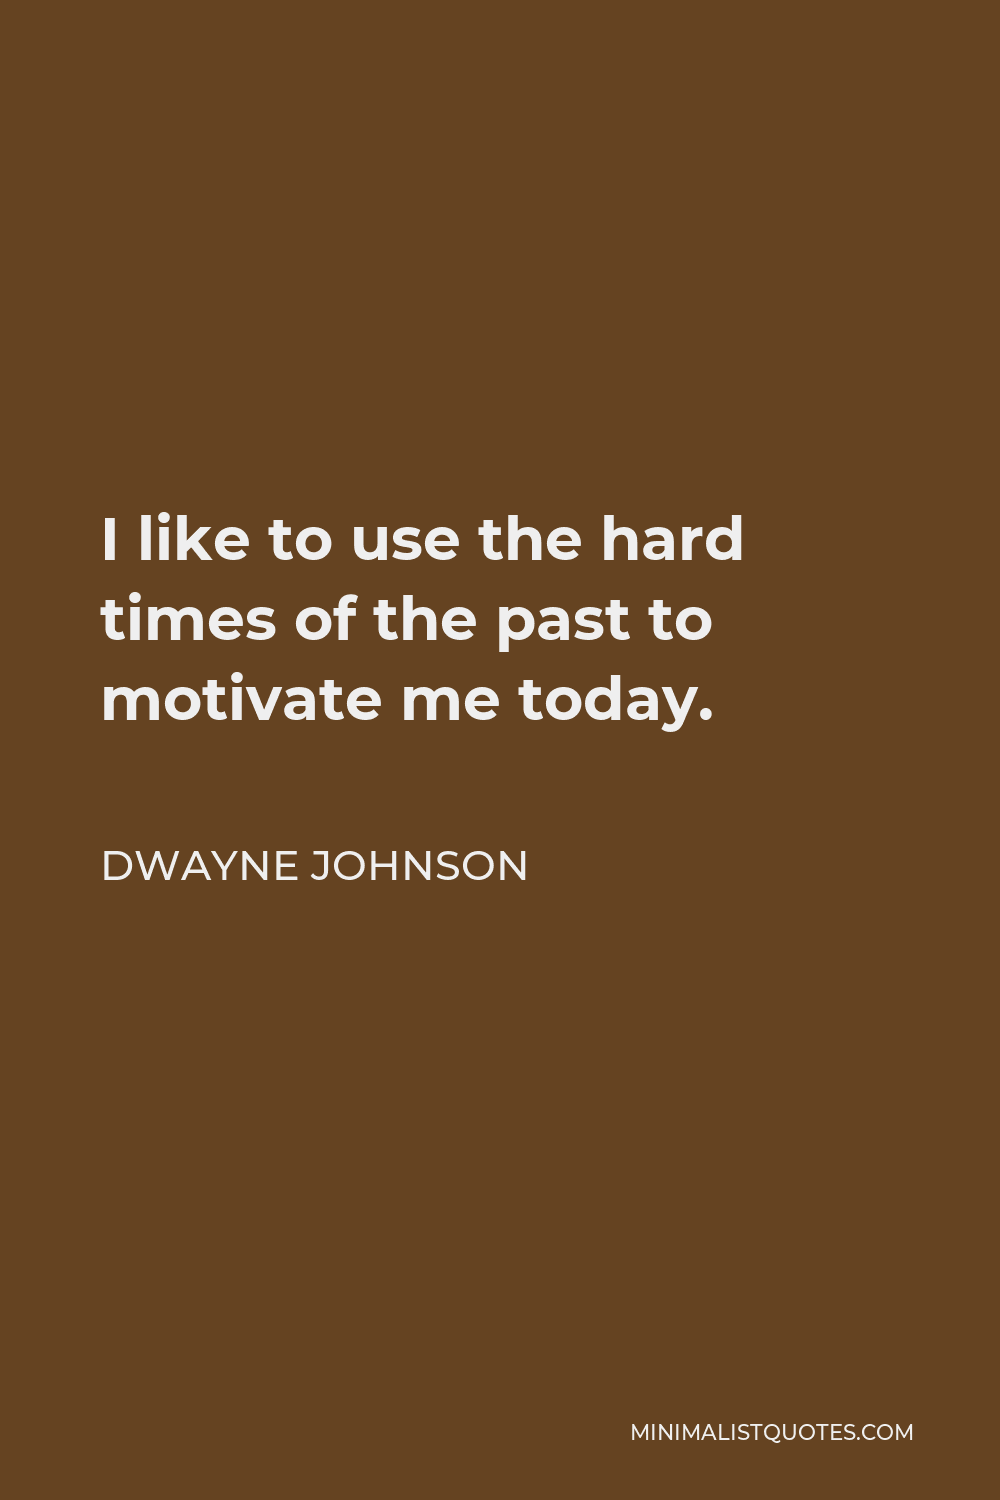 Dwayne Johnson Quote - I like to use the hard times of the past to motivate me today.